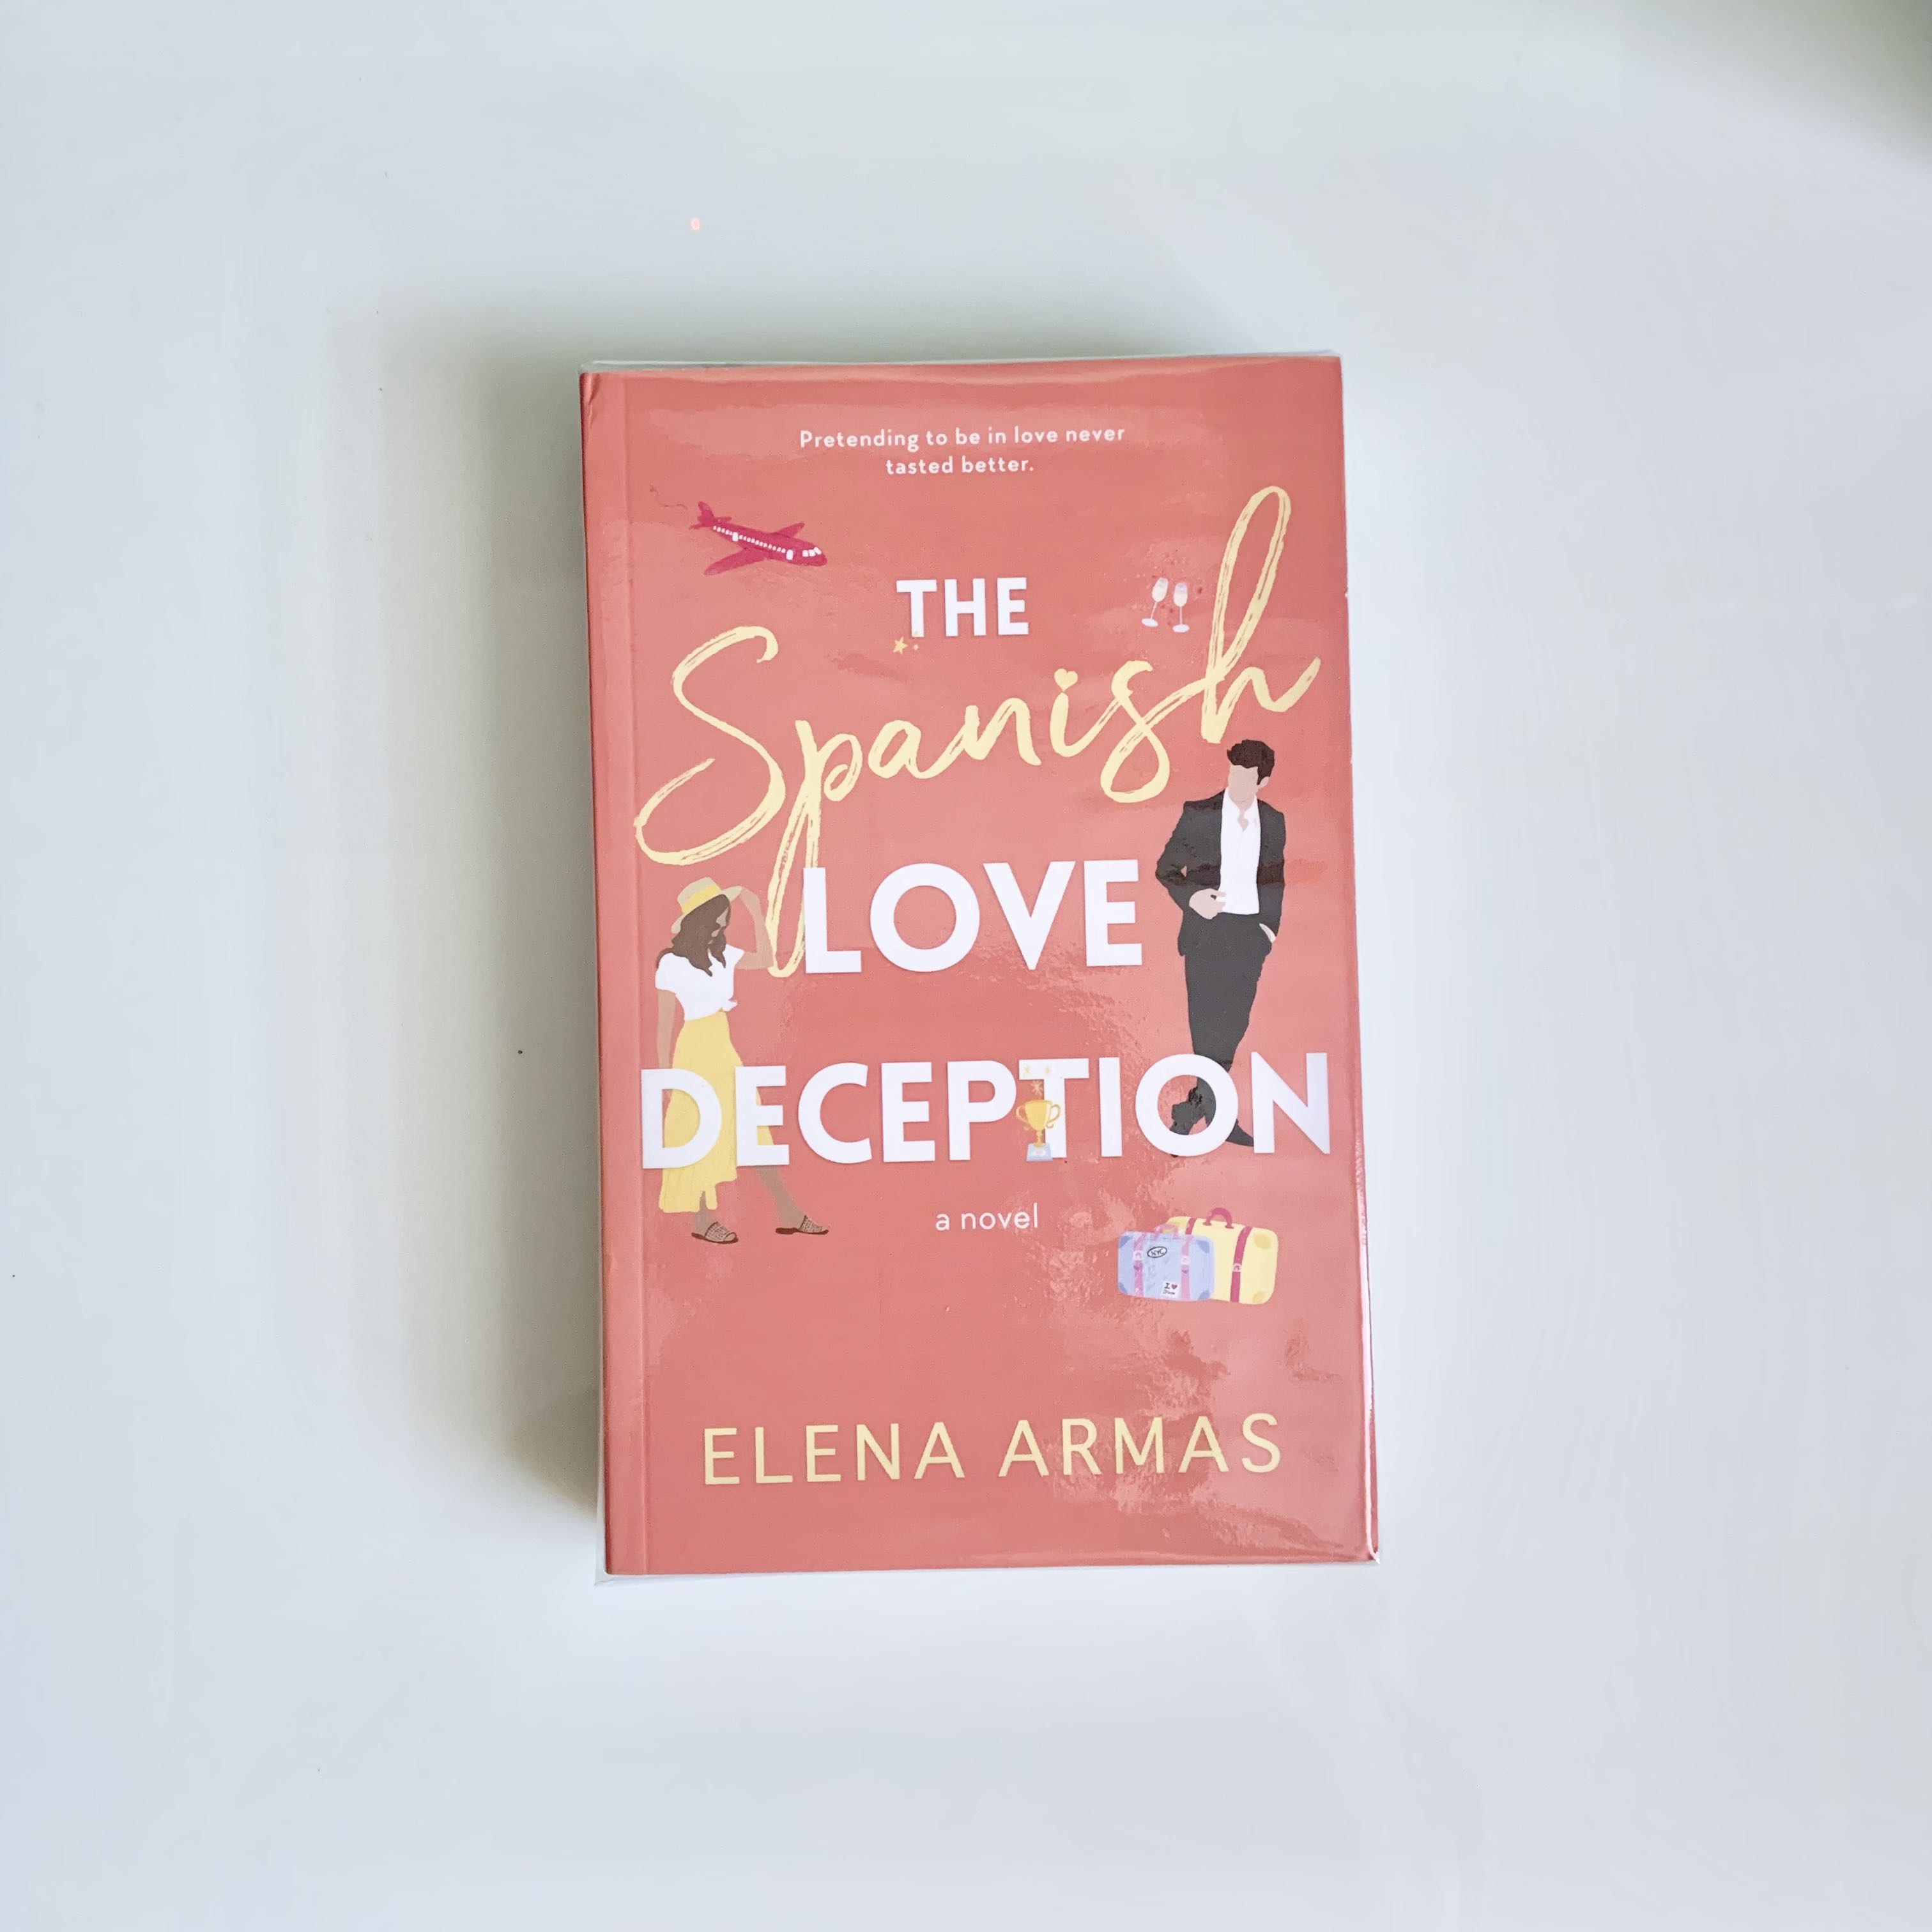 Spanish love pdf the deception [DOWNLOAD] The